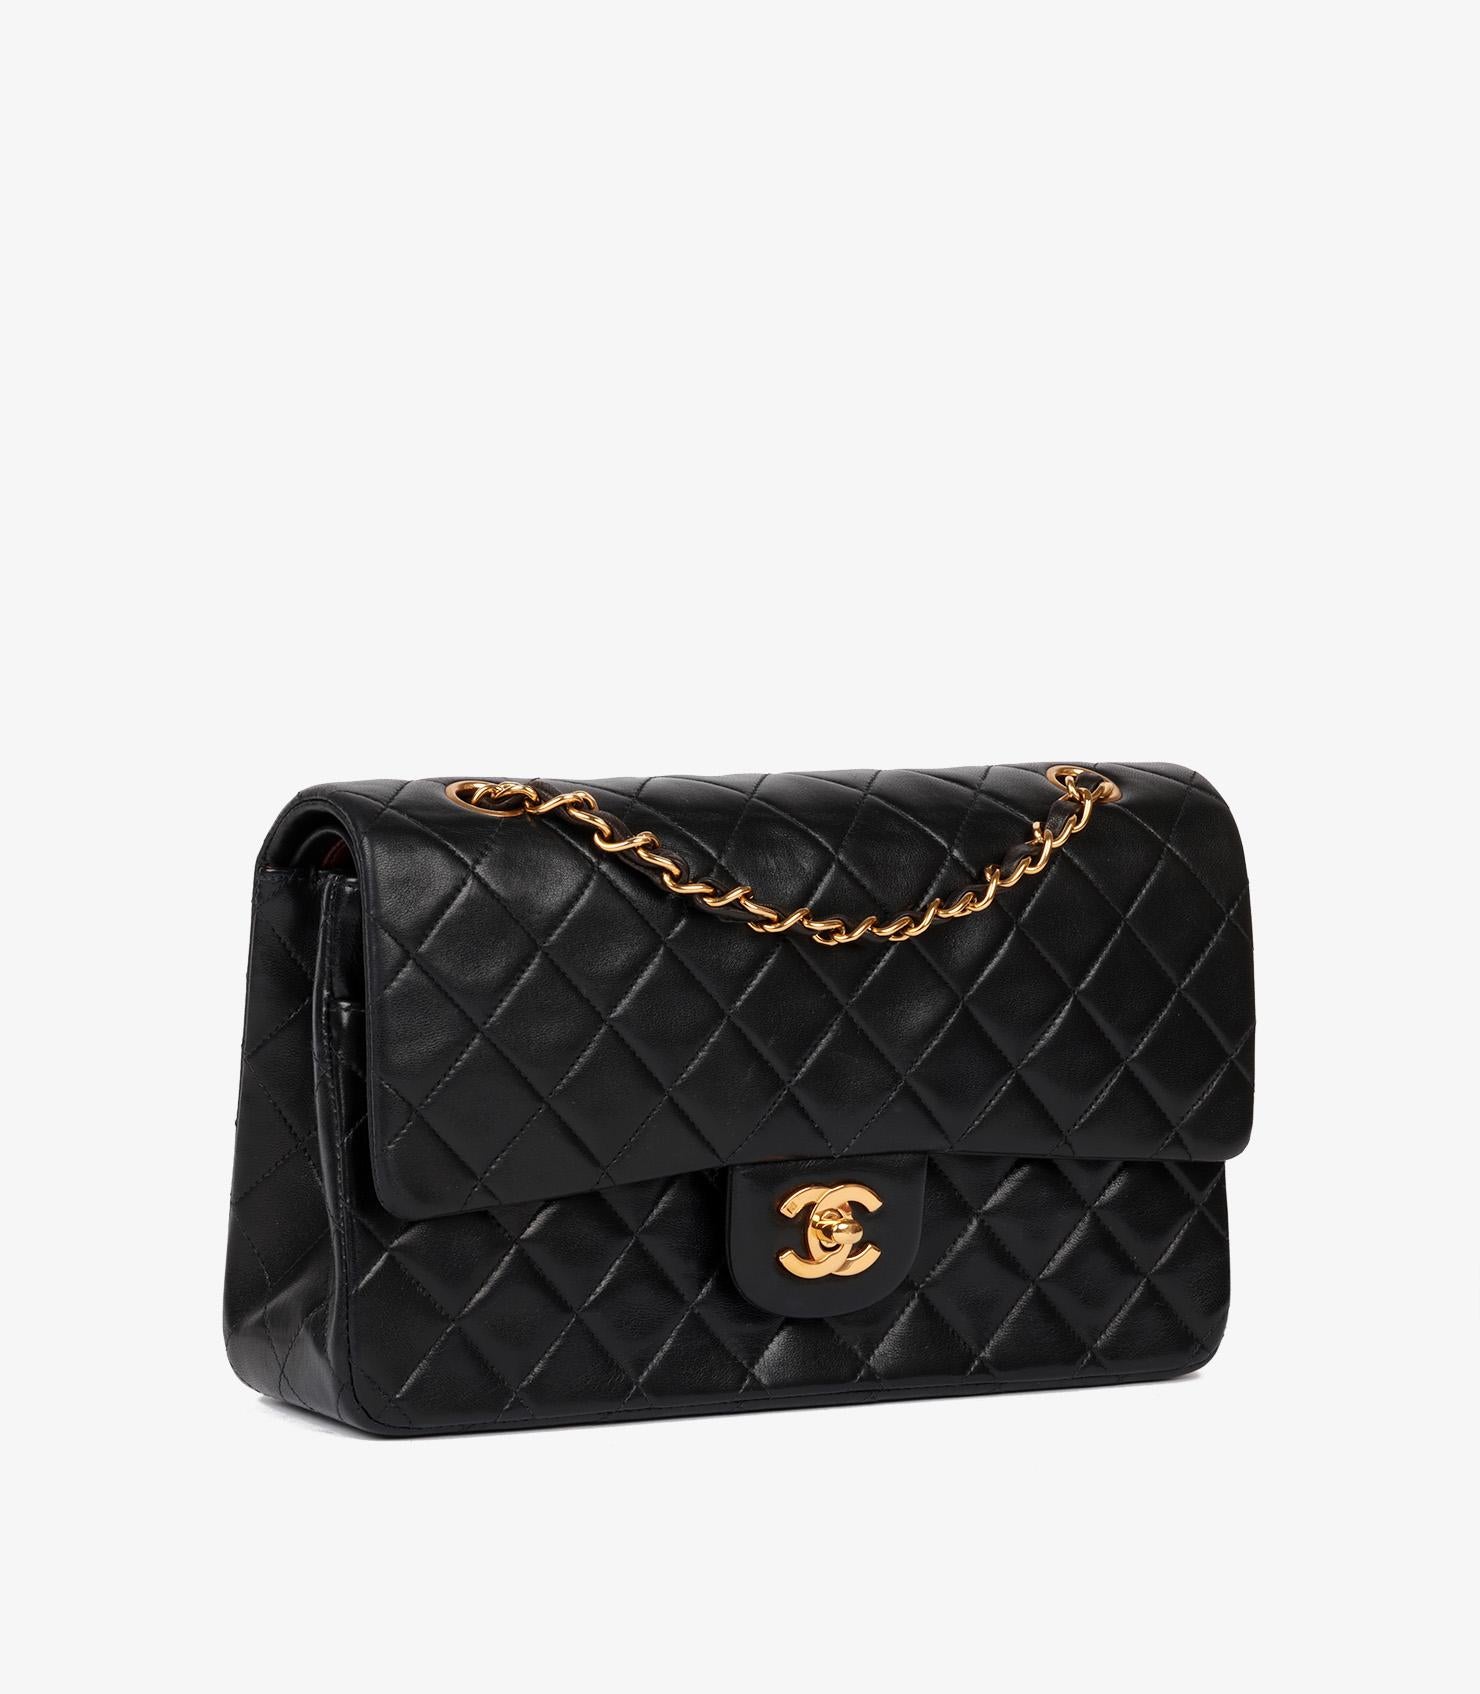 Chanel Black Quilted Lambskin Vintage Medium Classic Double Flap Bag

Brand- Chanel
Model- Medium Classic Double Flap Bag
Product Type- Shoulder
Serial Number- 41*****
Age- Circa 1996
Accompanied By- Chanel Dust Bag, Authenticity Card
Colour-